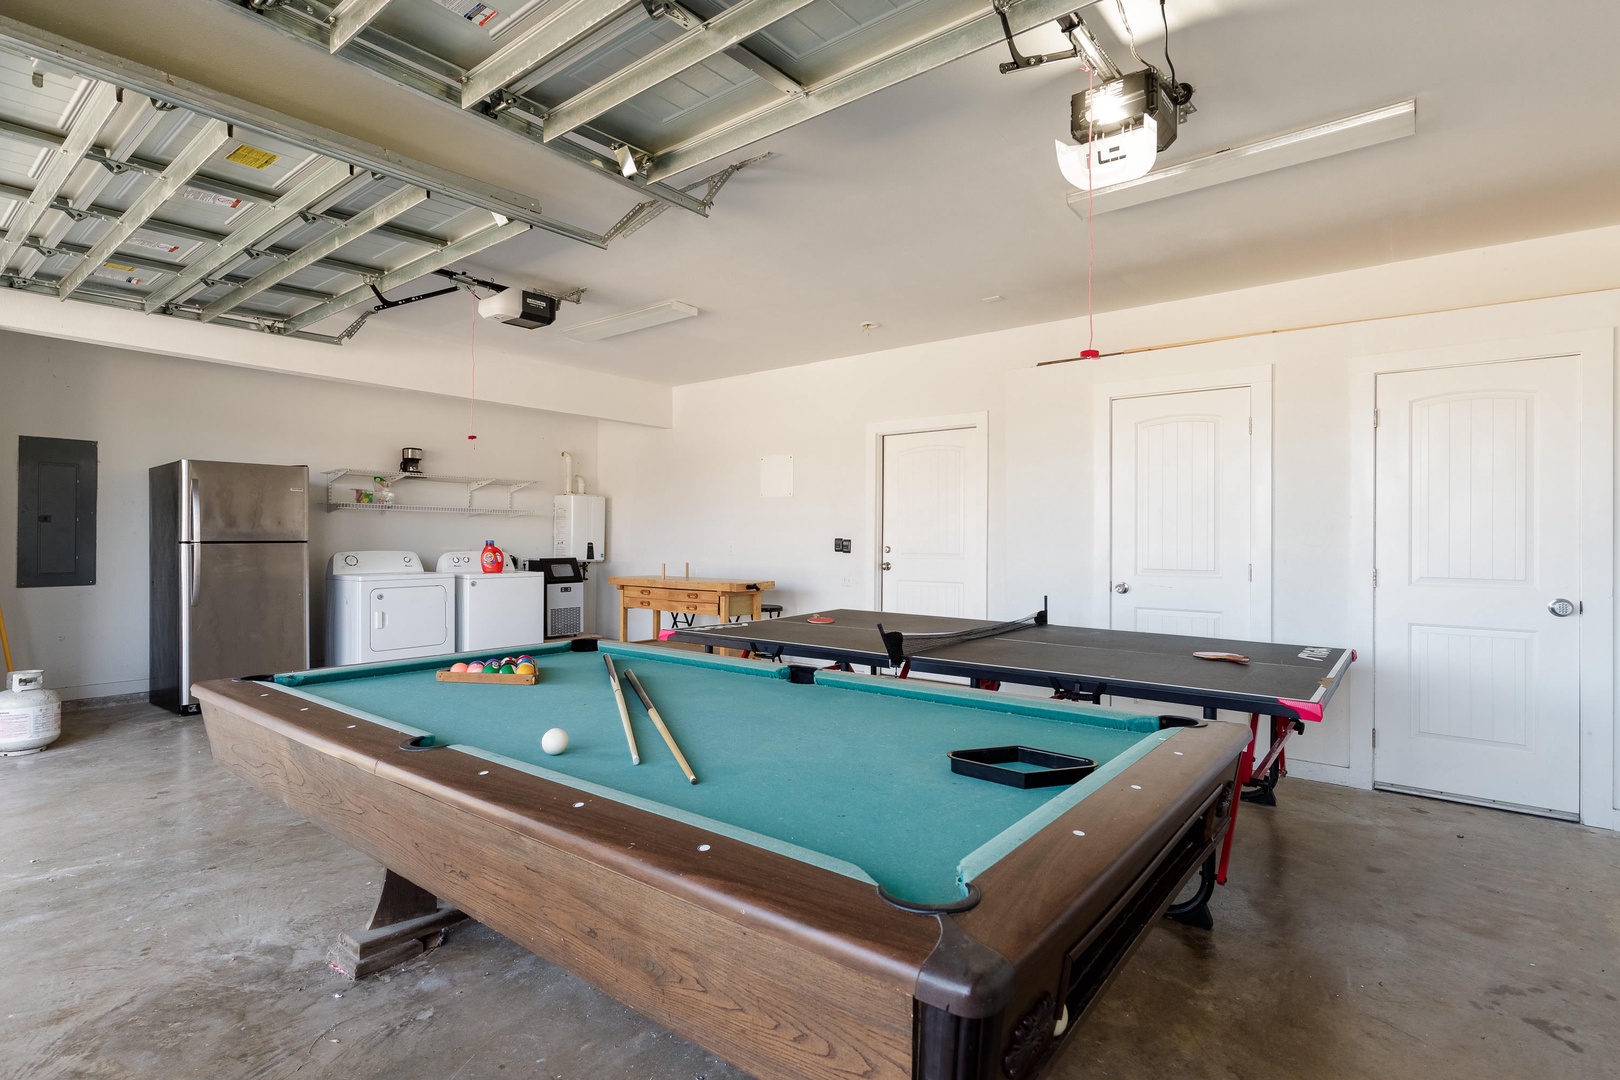 Pool Table and Table Tennis